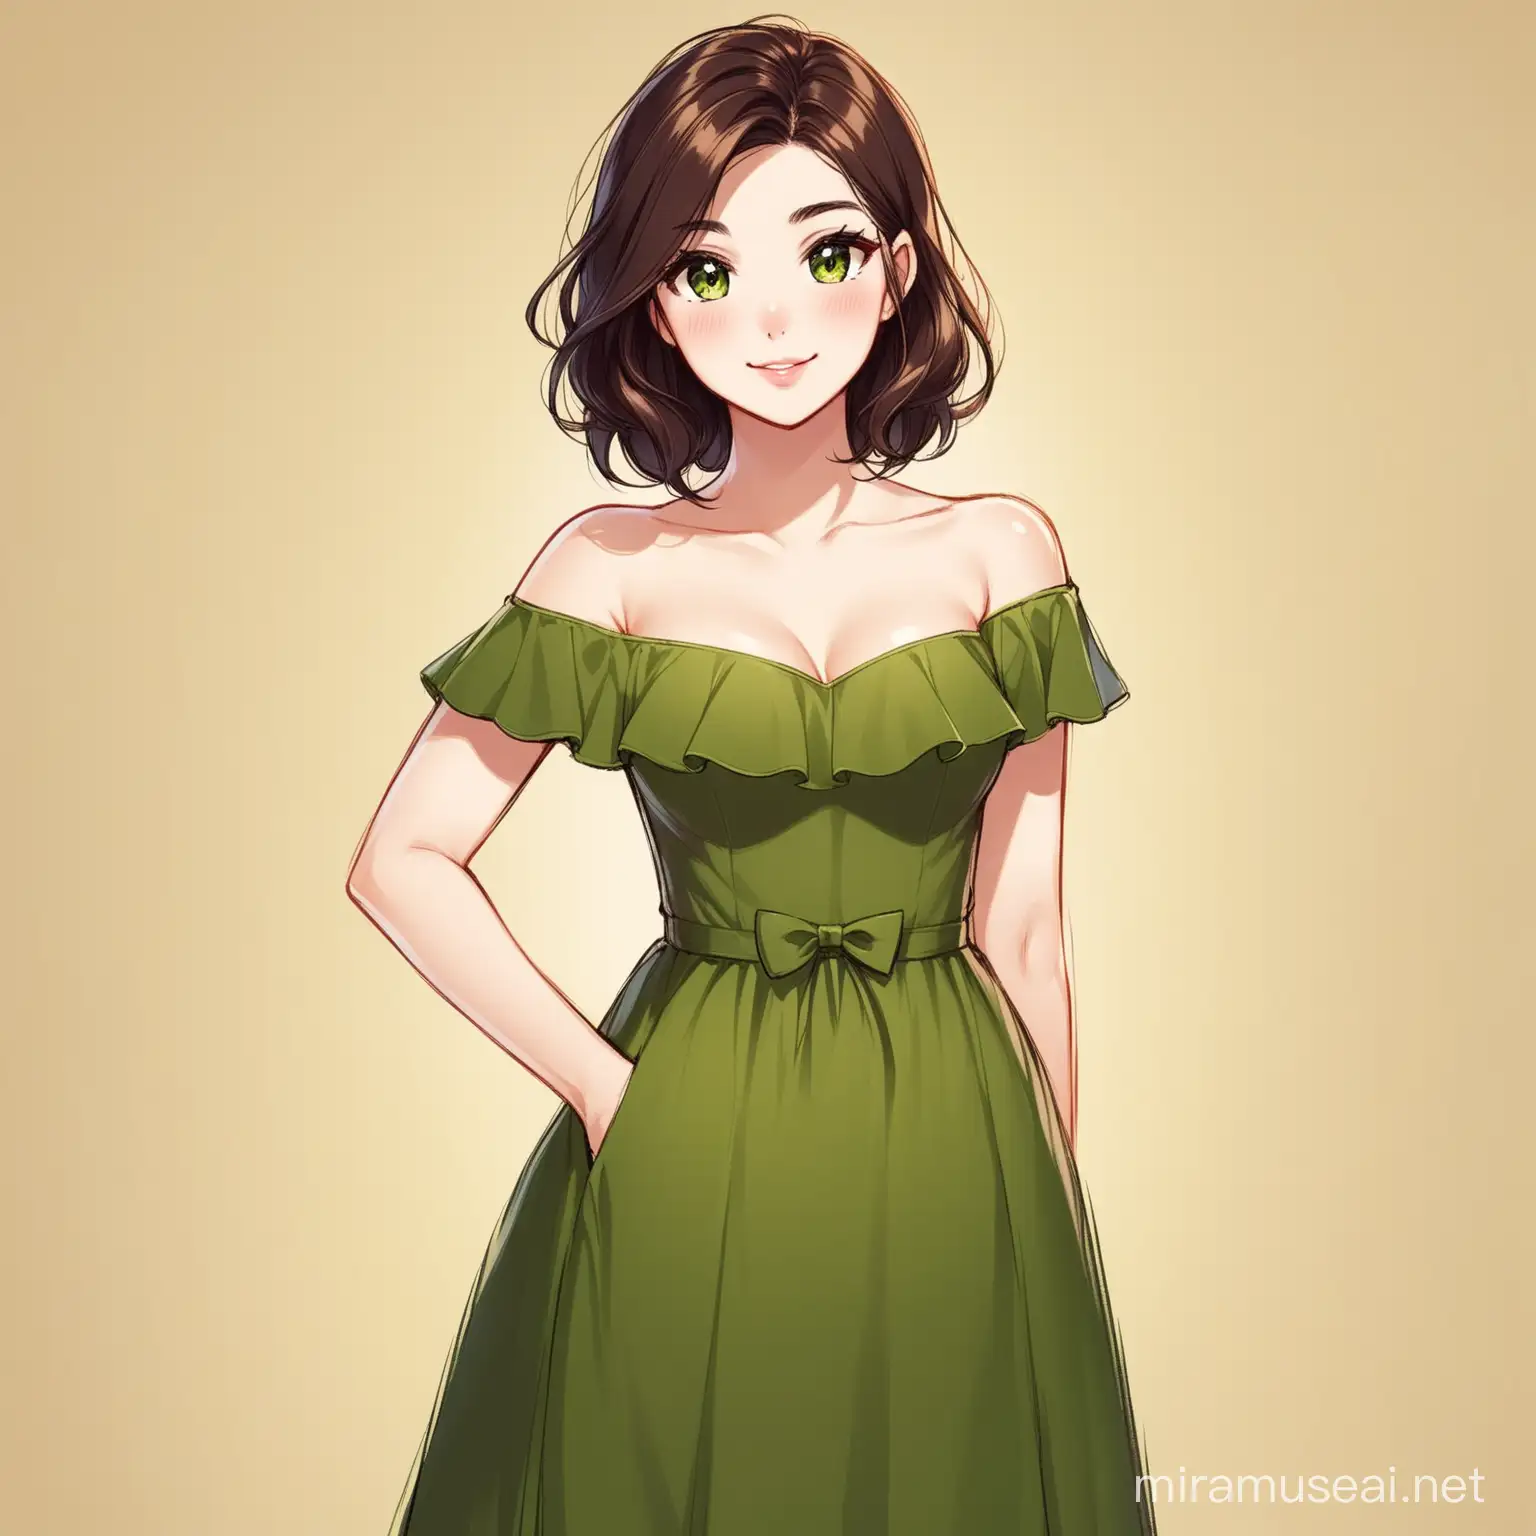 Elegant Horse Girl Attending a Winethemed Costume Party in Olive Green Dress